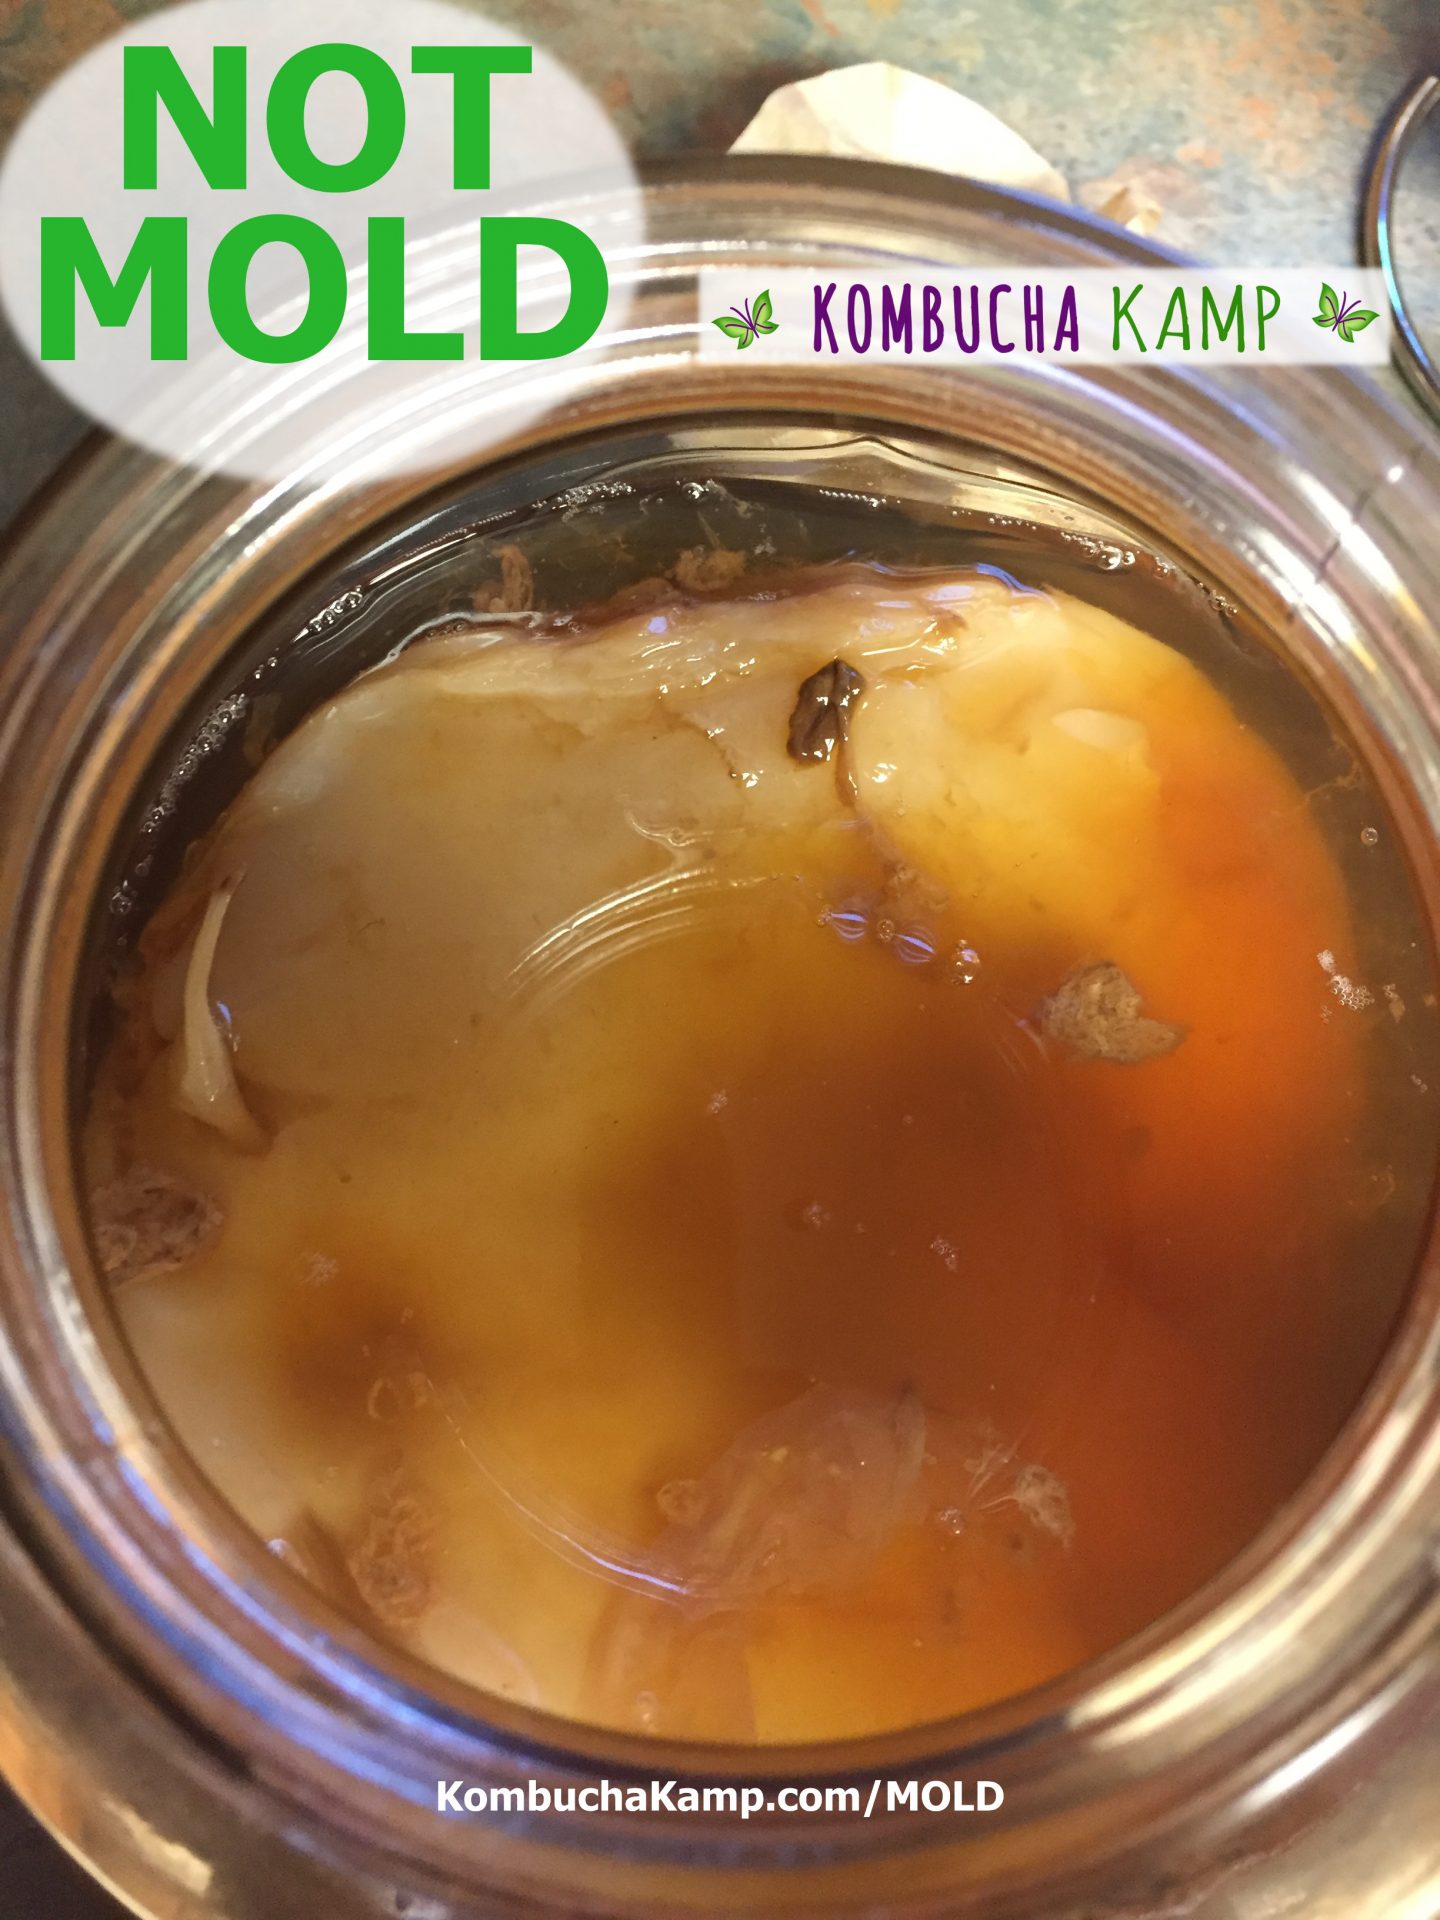 On top of the liquid in a new Kombucha brew floats a number of brown yeast collections that might be mistaken for mold but are normal and not a concern.